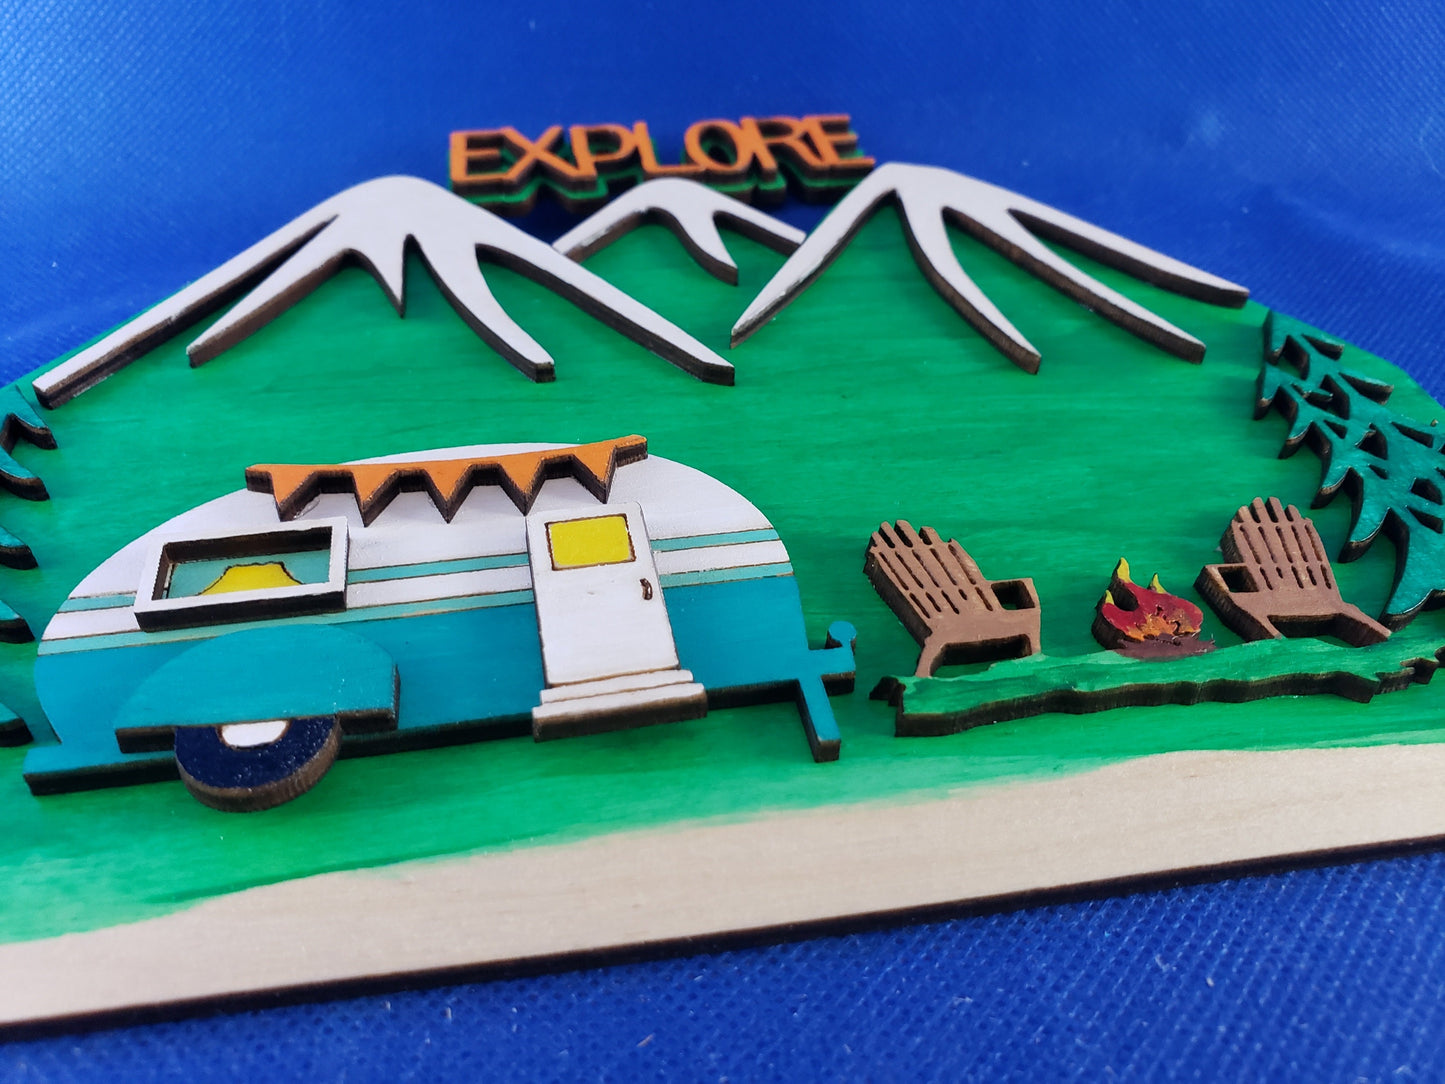 Explore Camping  - DIY unfinished Changeable sign insert